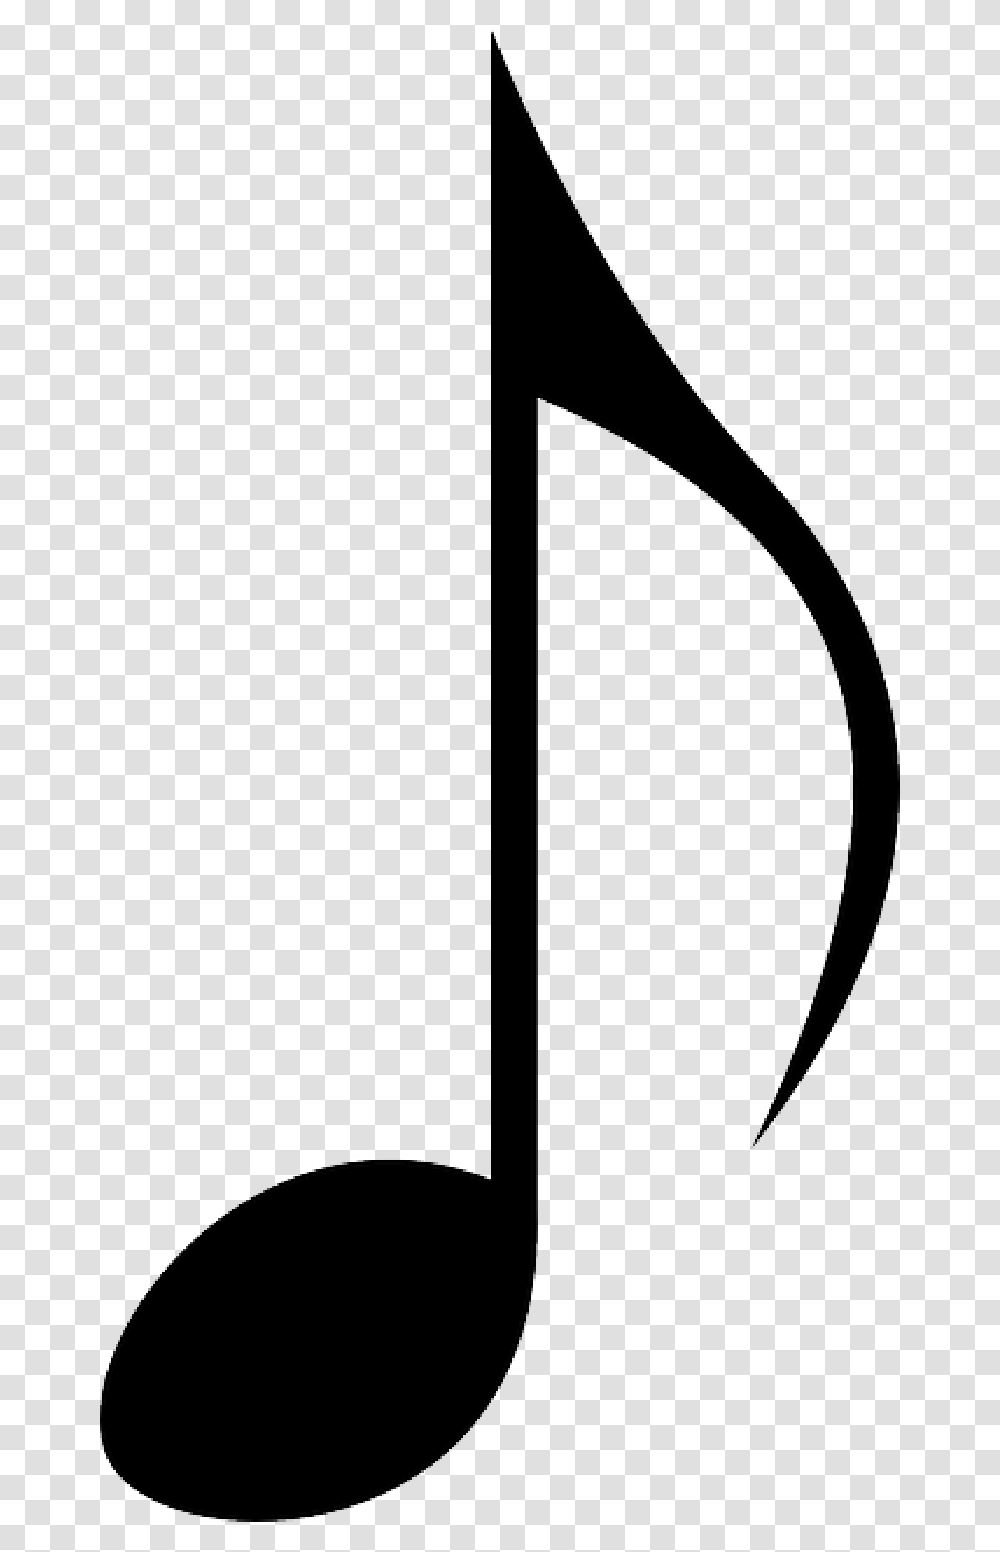 Music Note Clip Art Ayomove, Label, Silhouette Transparent Png